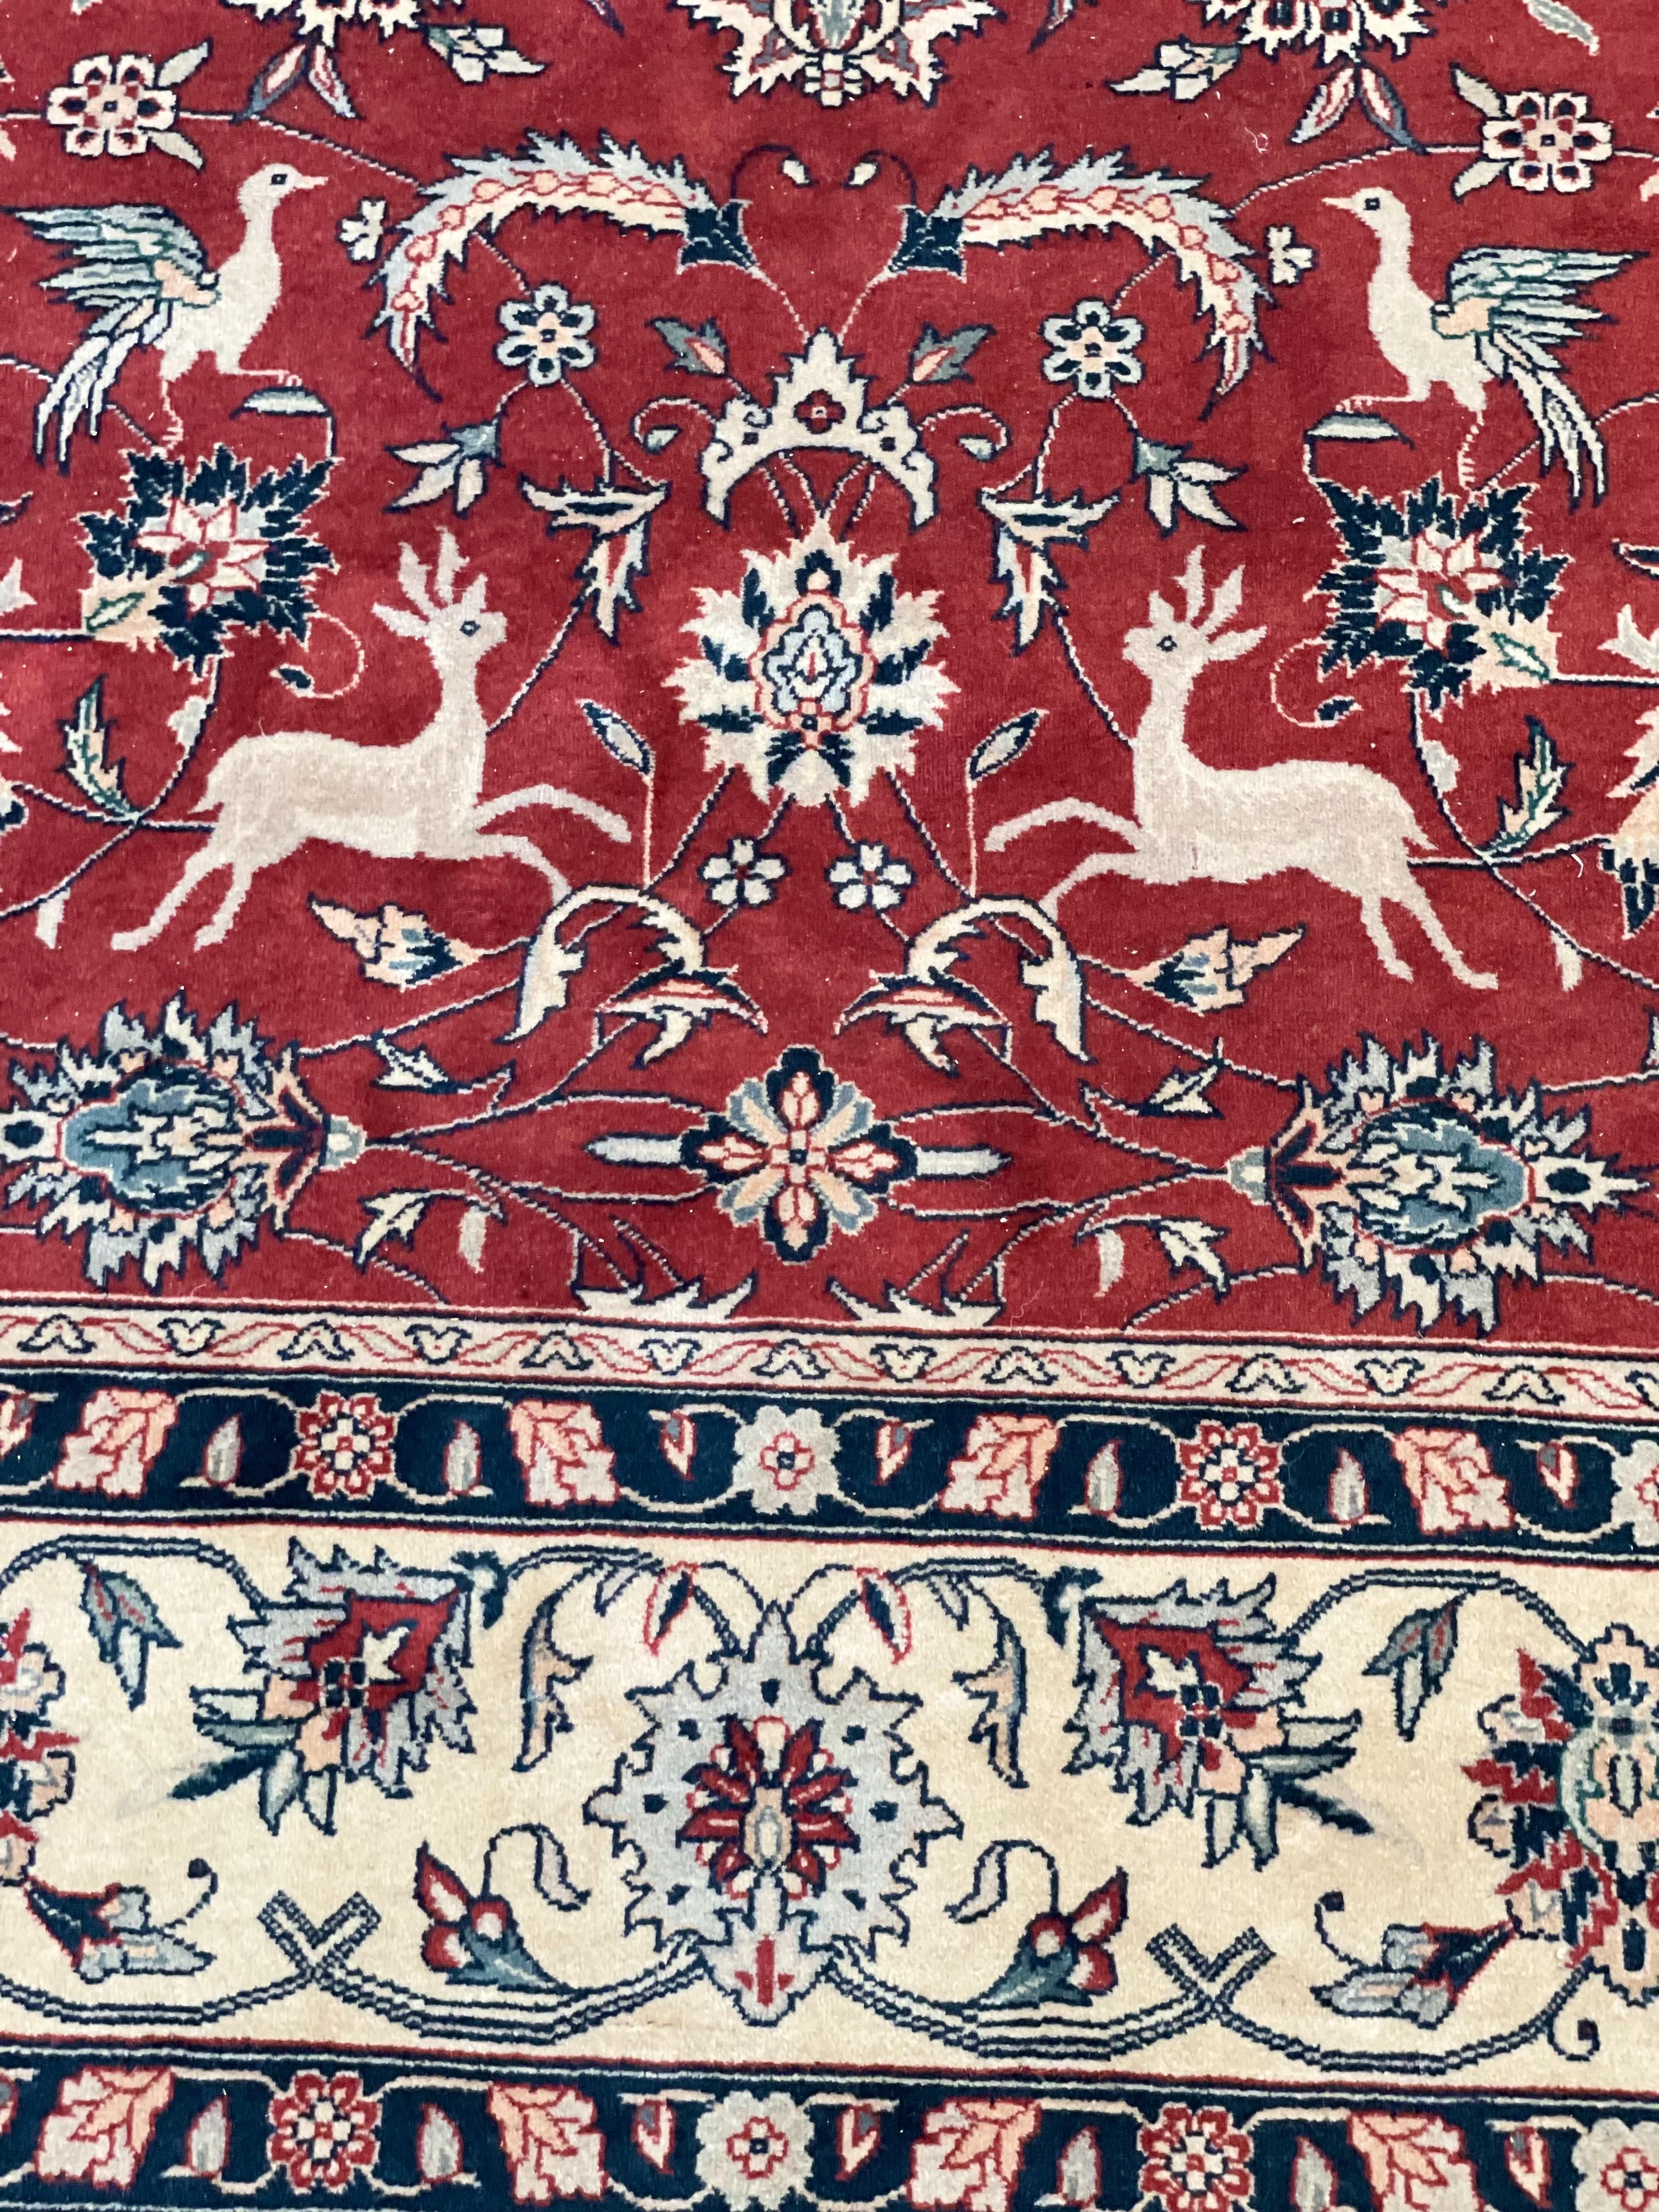 A large Persian pure-wool rug, featuring a central panel intricately woven with birds, deer and foliage, all set against a brick-red background.